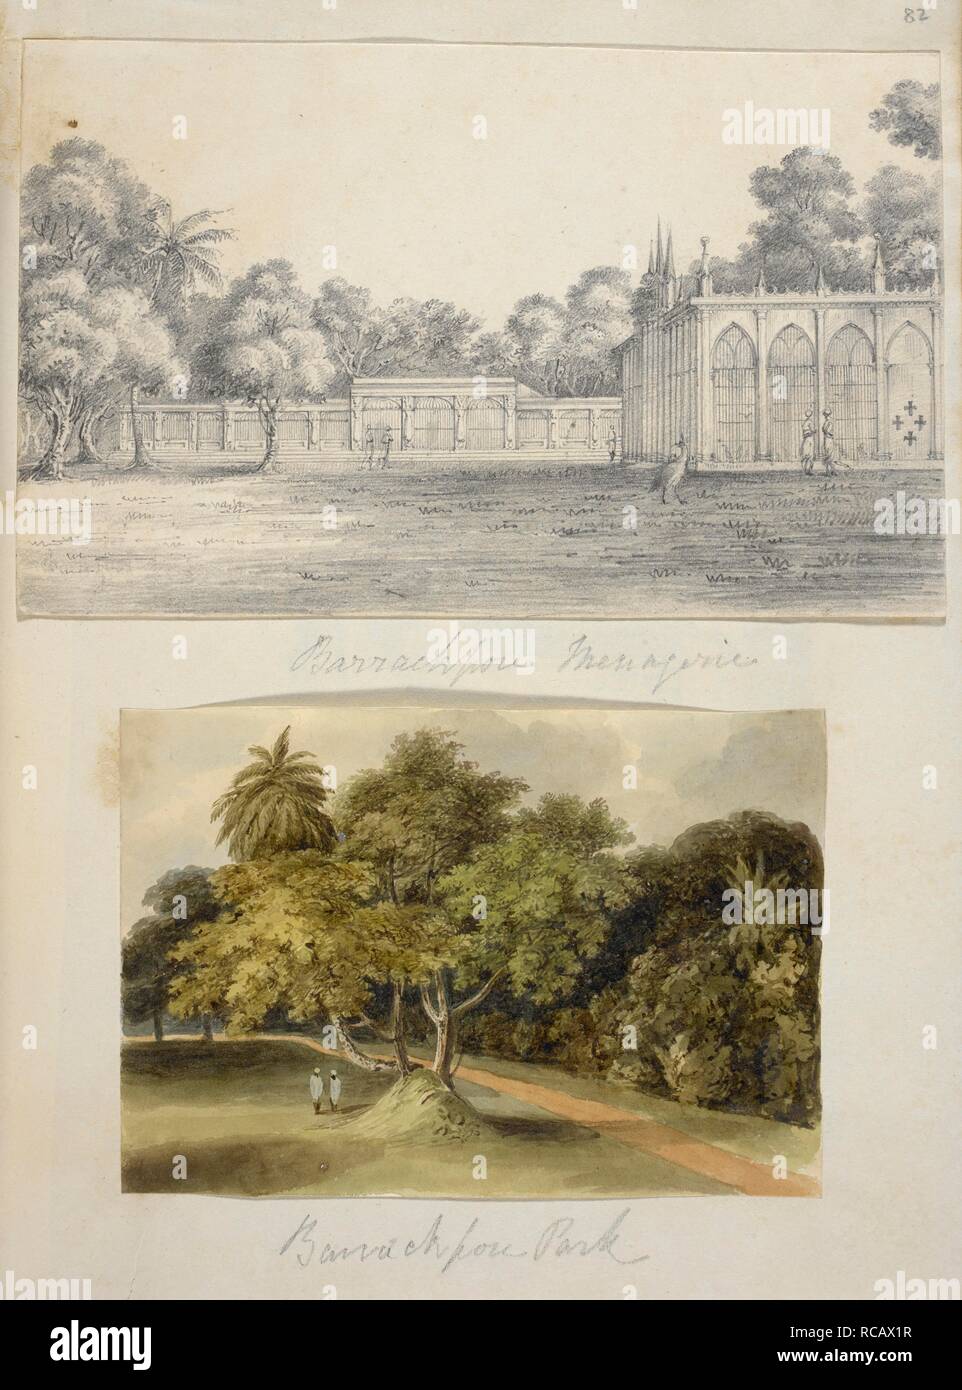 Barrackpore Menagerie. Below, Barrackpore Park  . Hastings Albums. 1810s - 1820s. Pencil drawing; watercolour. Source: WD 4402, f.82. Stock Photo